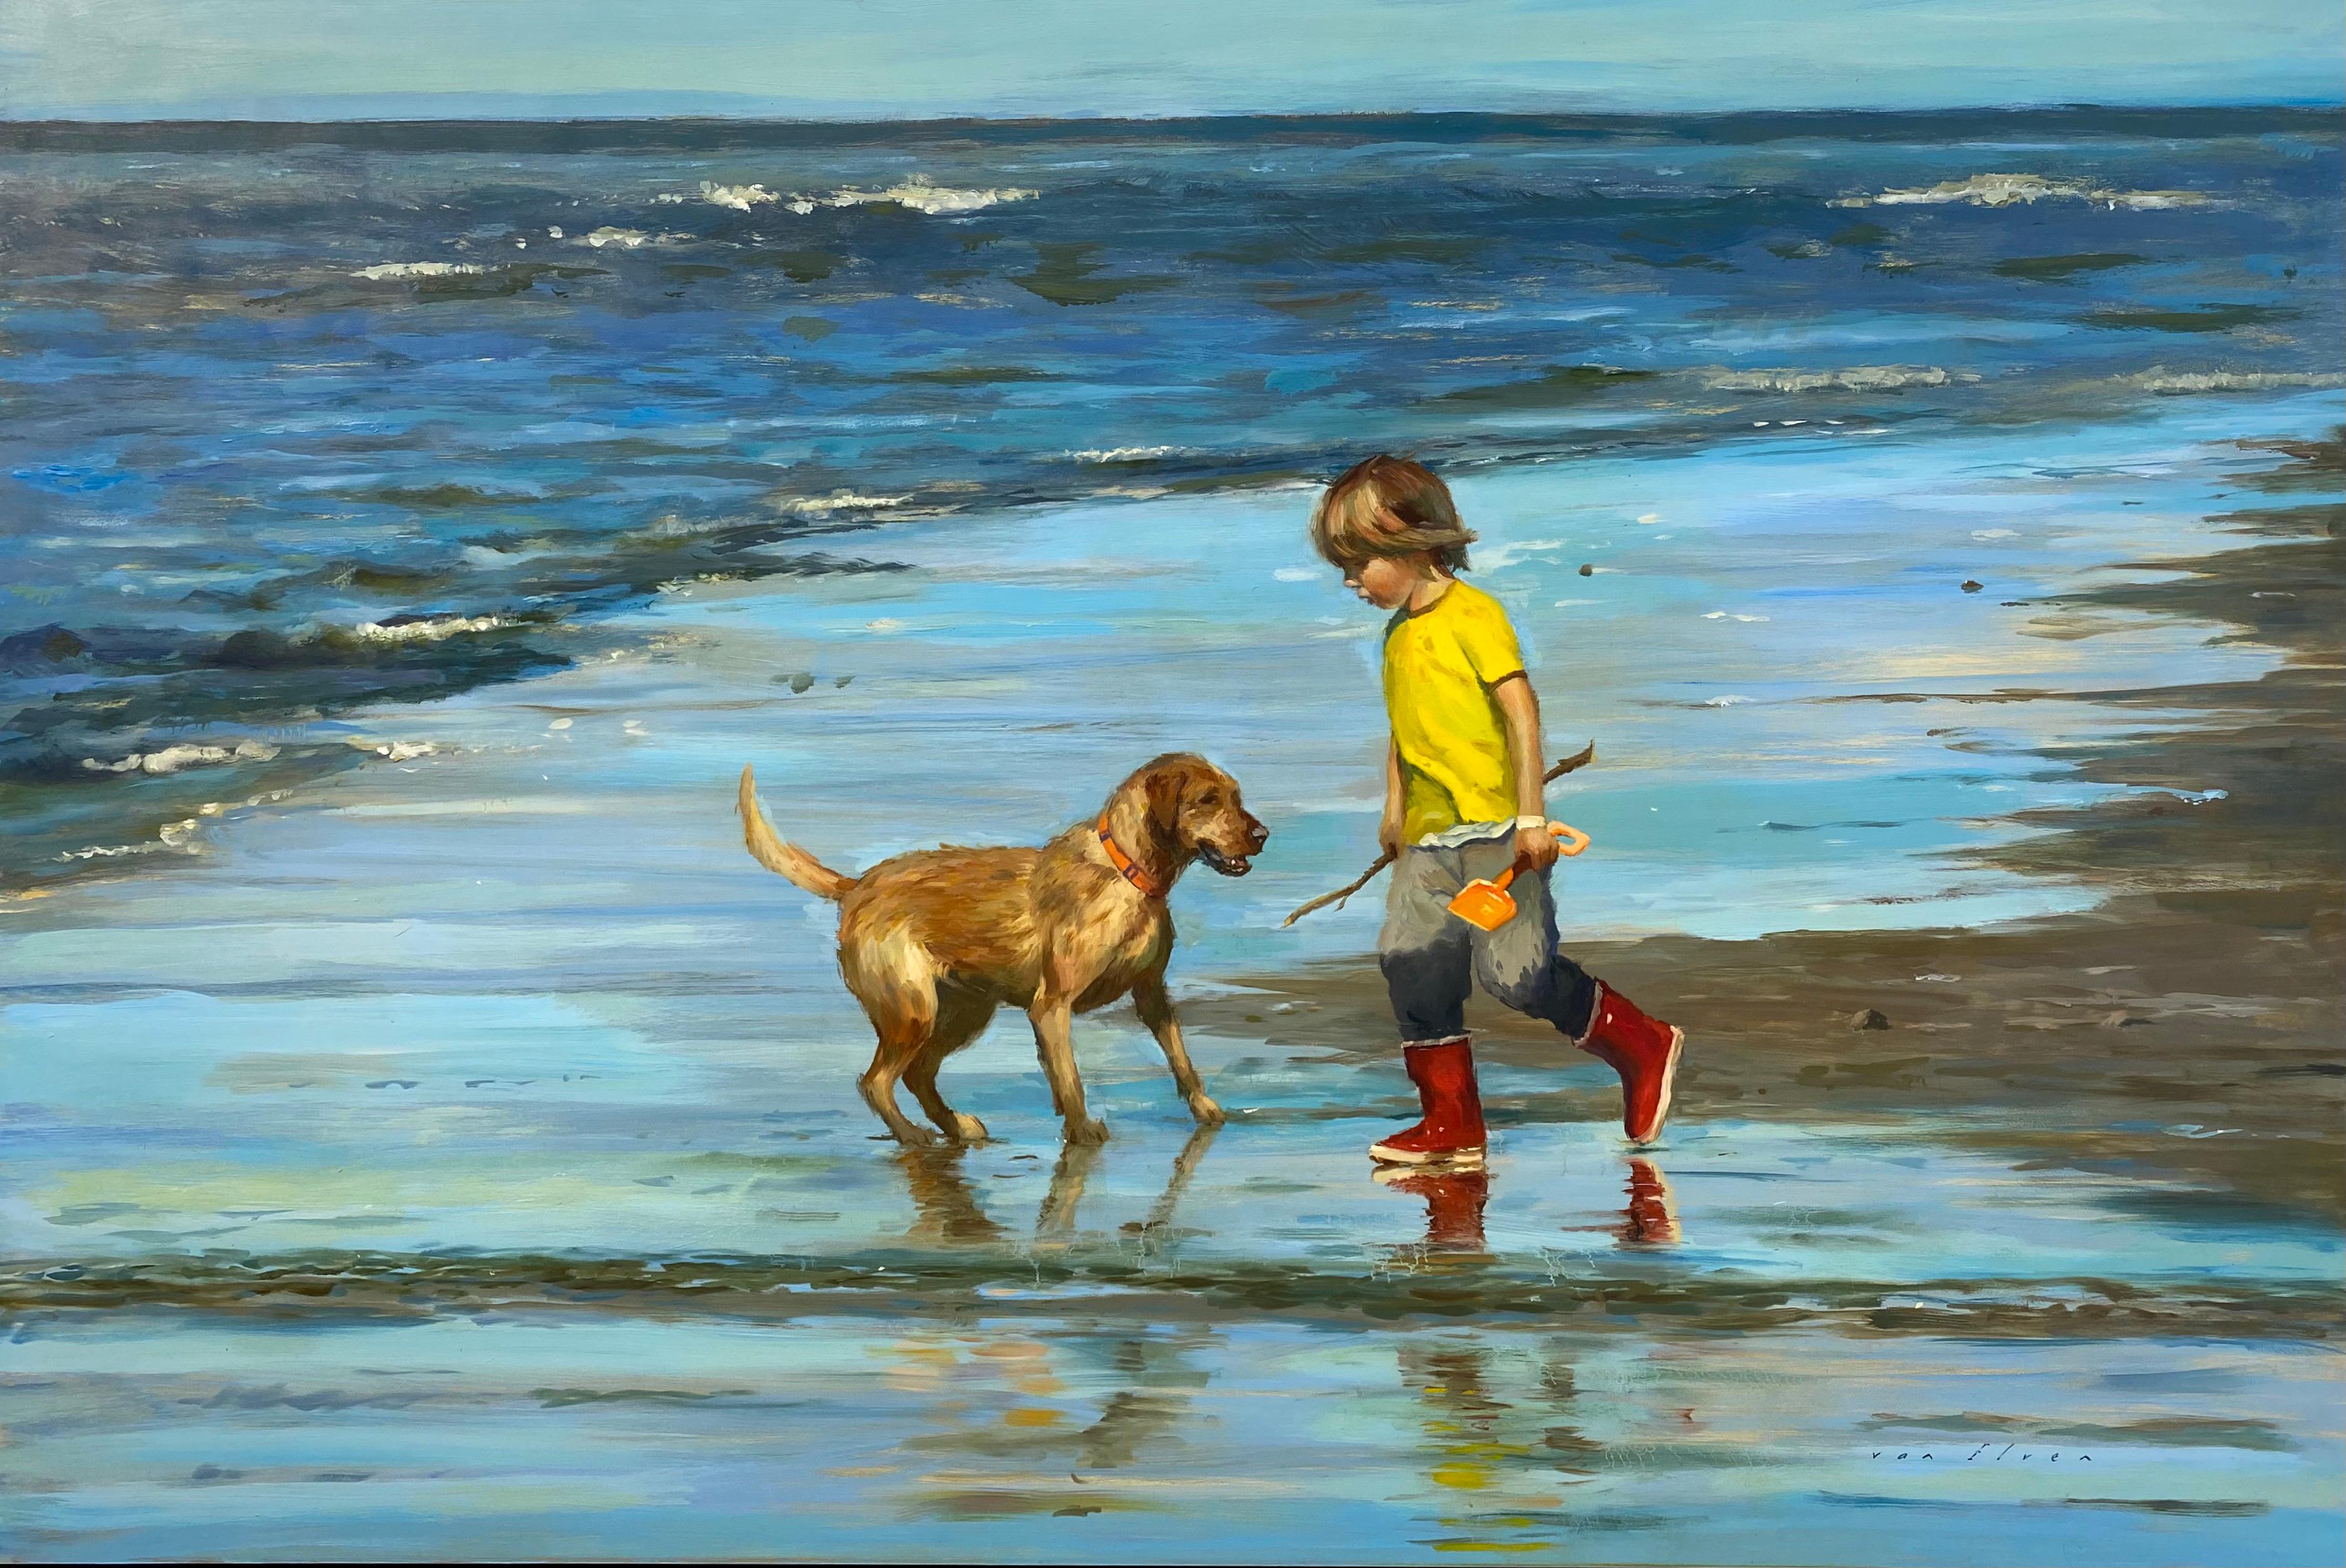 Erik van Elven Figurative Painting - Beachbuddies - 21st Century Contemporary Painting 'a boy and his dog on a beach'